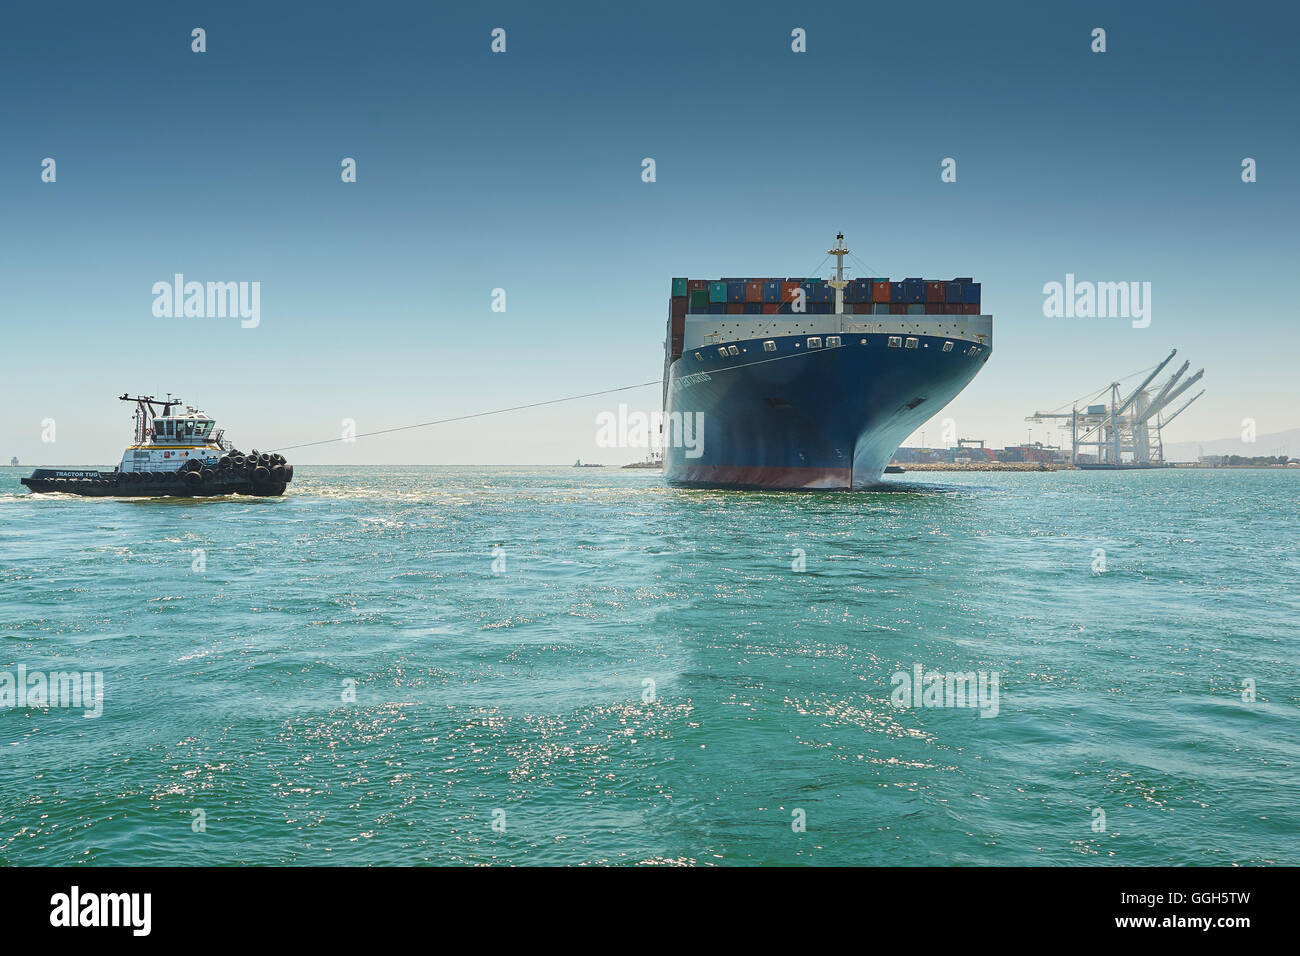 The Giant CMA CGM Centaurus Container Ship Is Manoeuvred Towards Pier J In The Long Beach Container Terminal, California, USA. Stock Photo